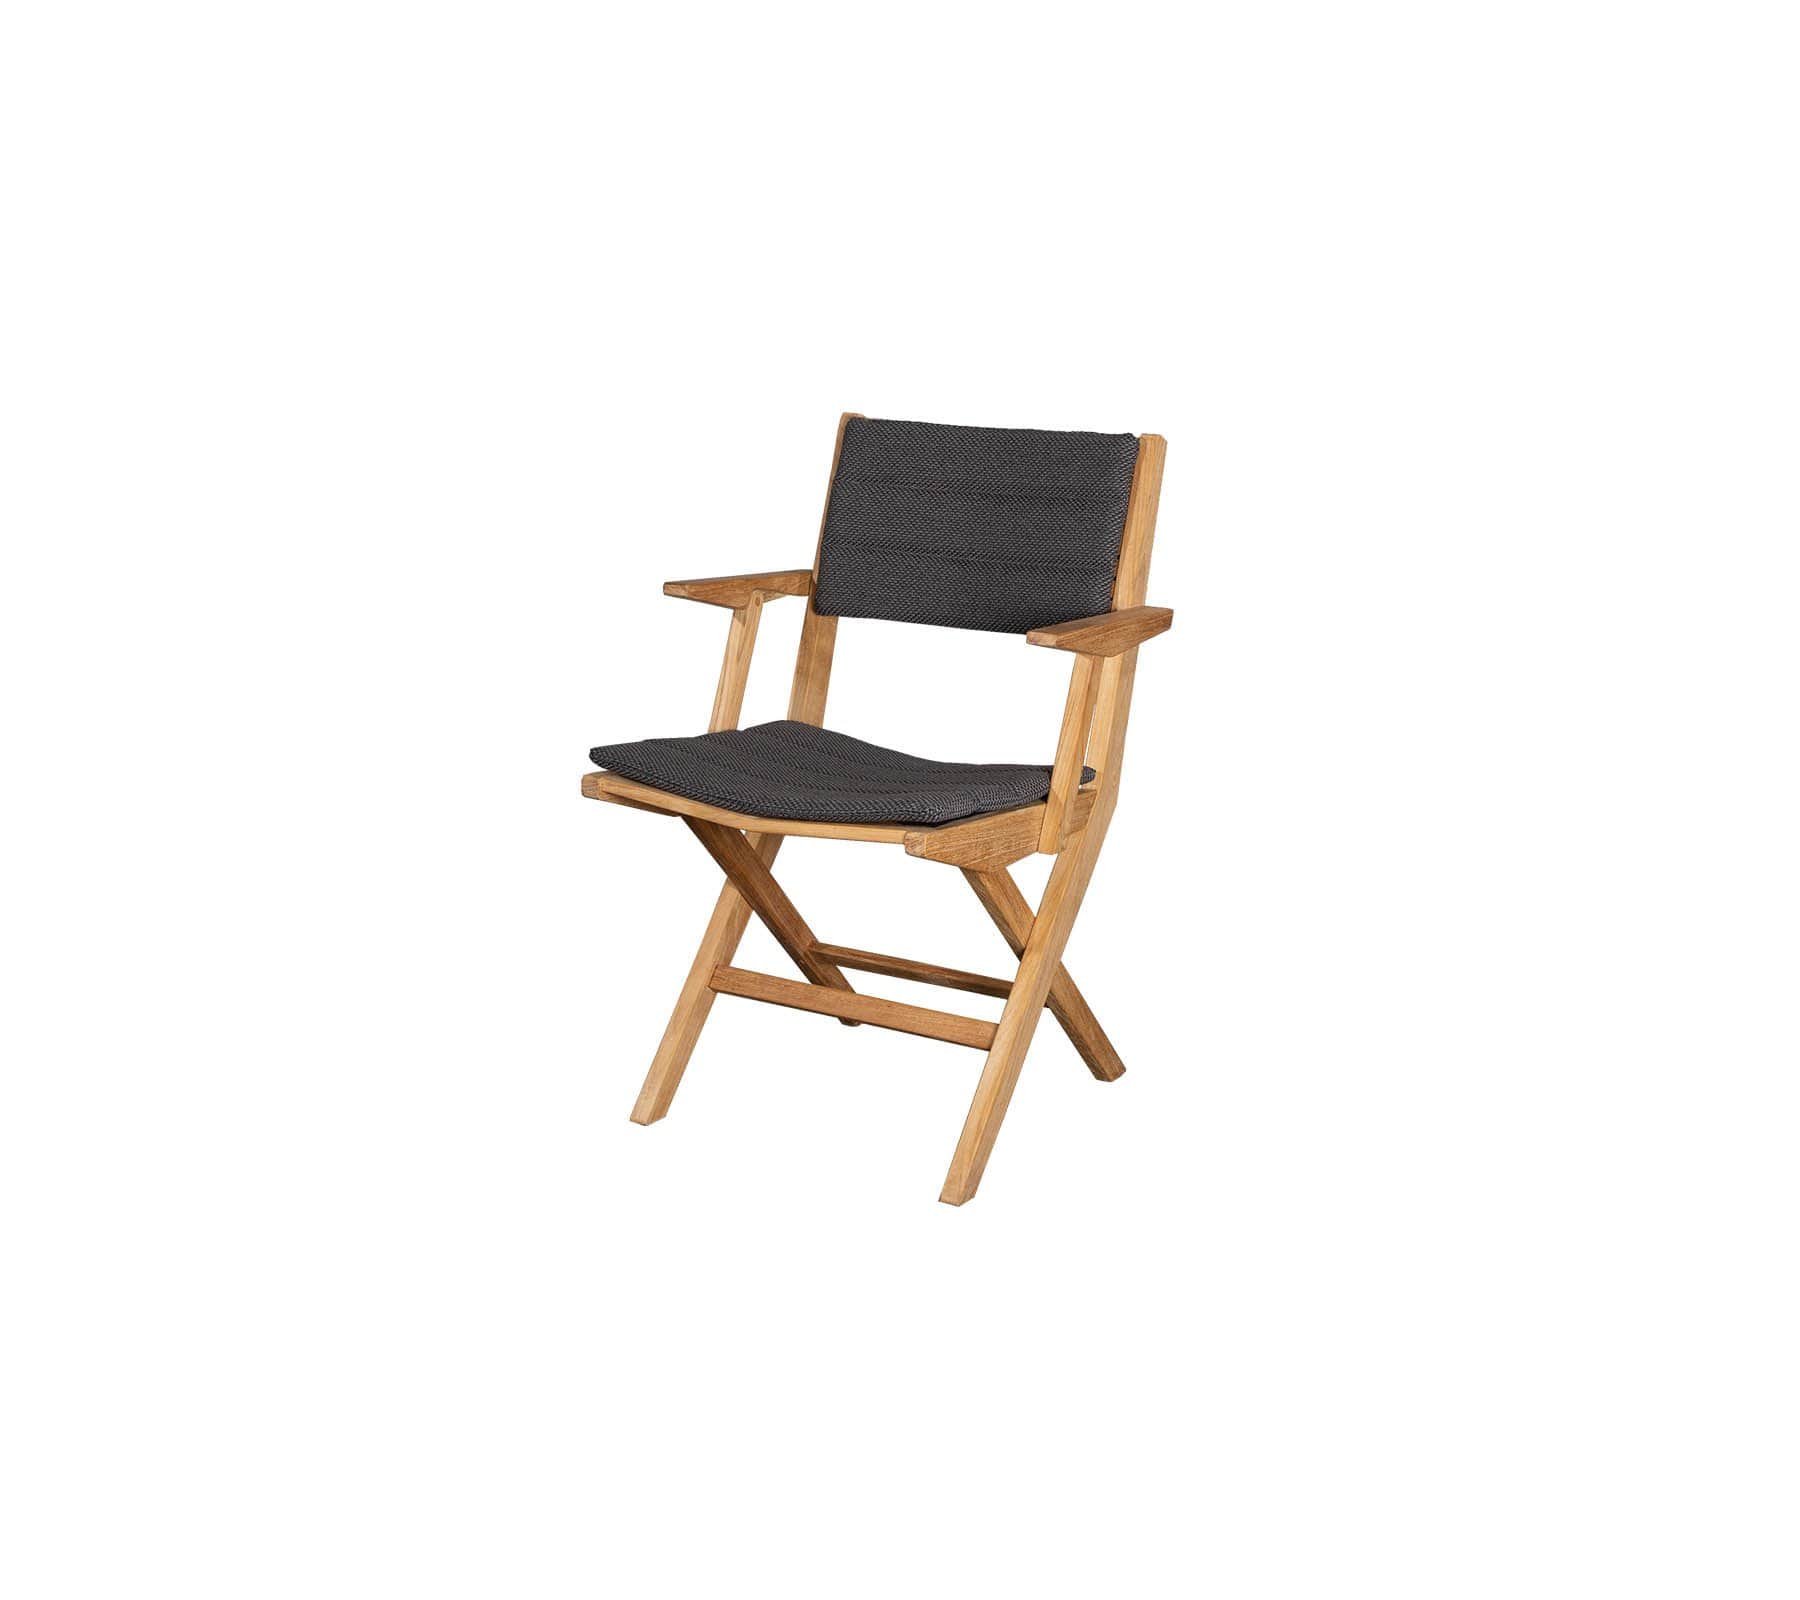 Boxhill's Flip Folding Outdoor Teak Dining Armchair with Dark Grey Cushion in white background